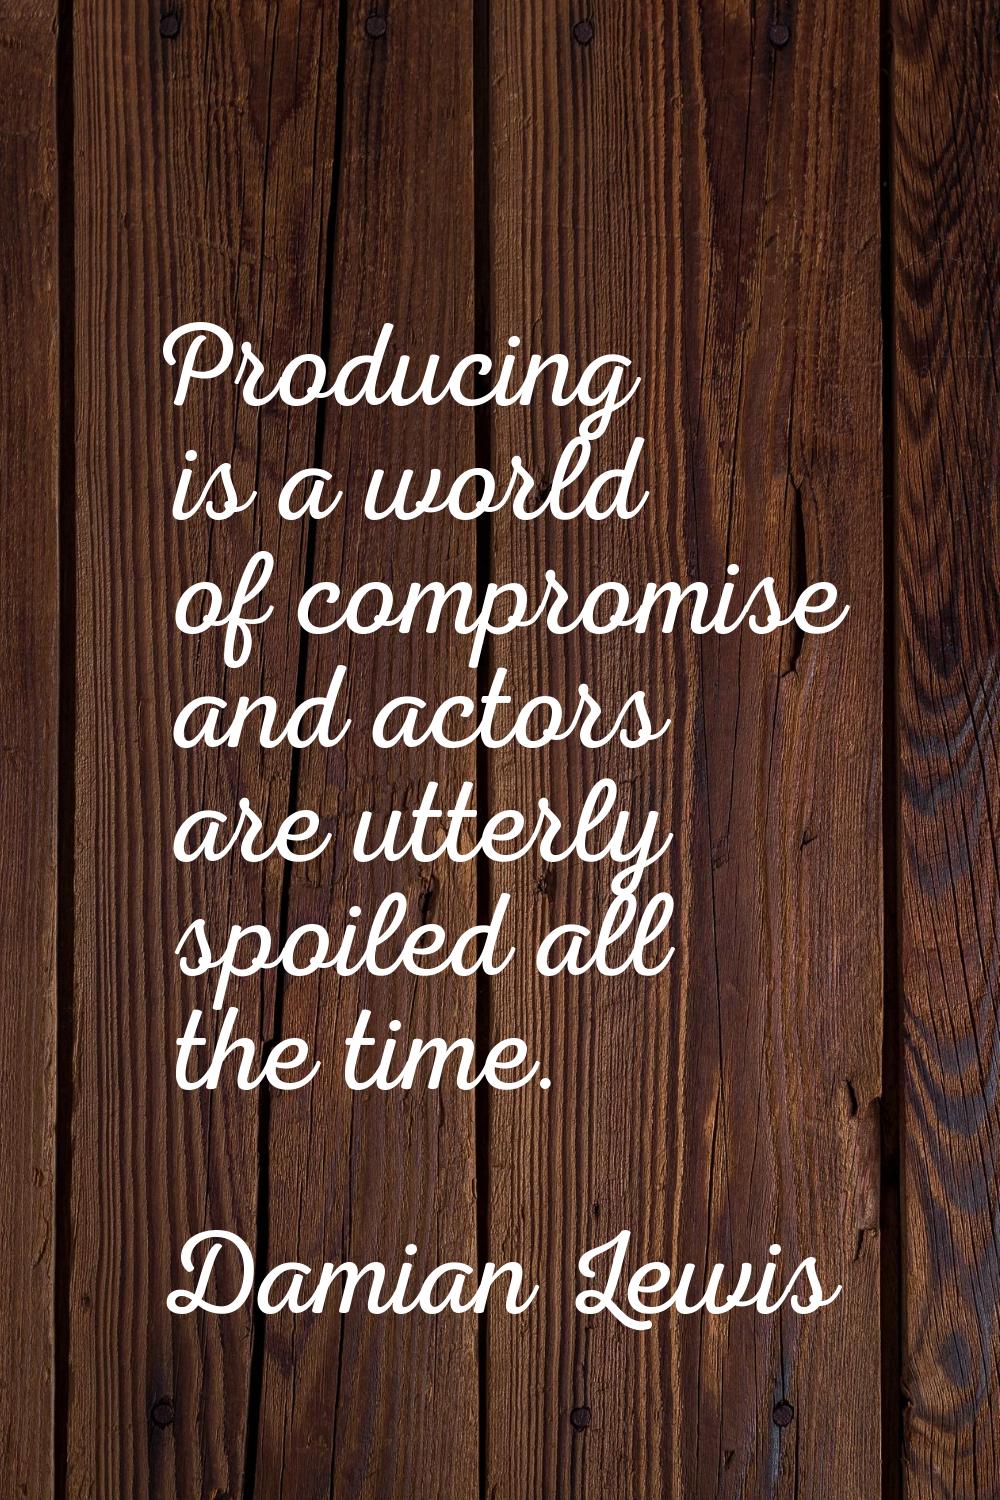 Producing is a world of compromise and actors are utterly spoiled all the time.